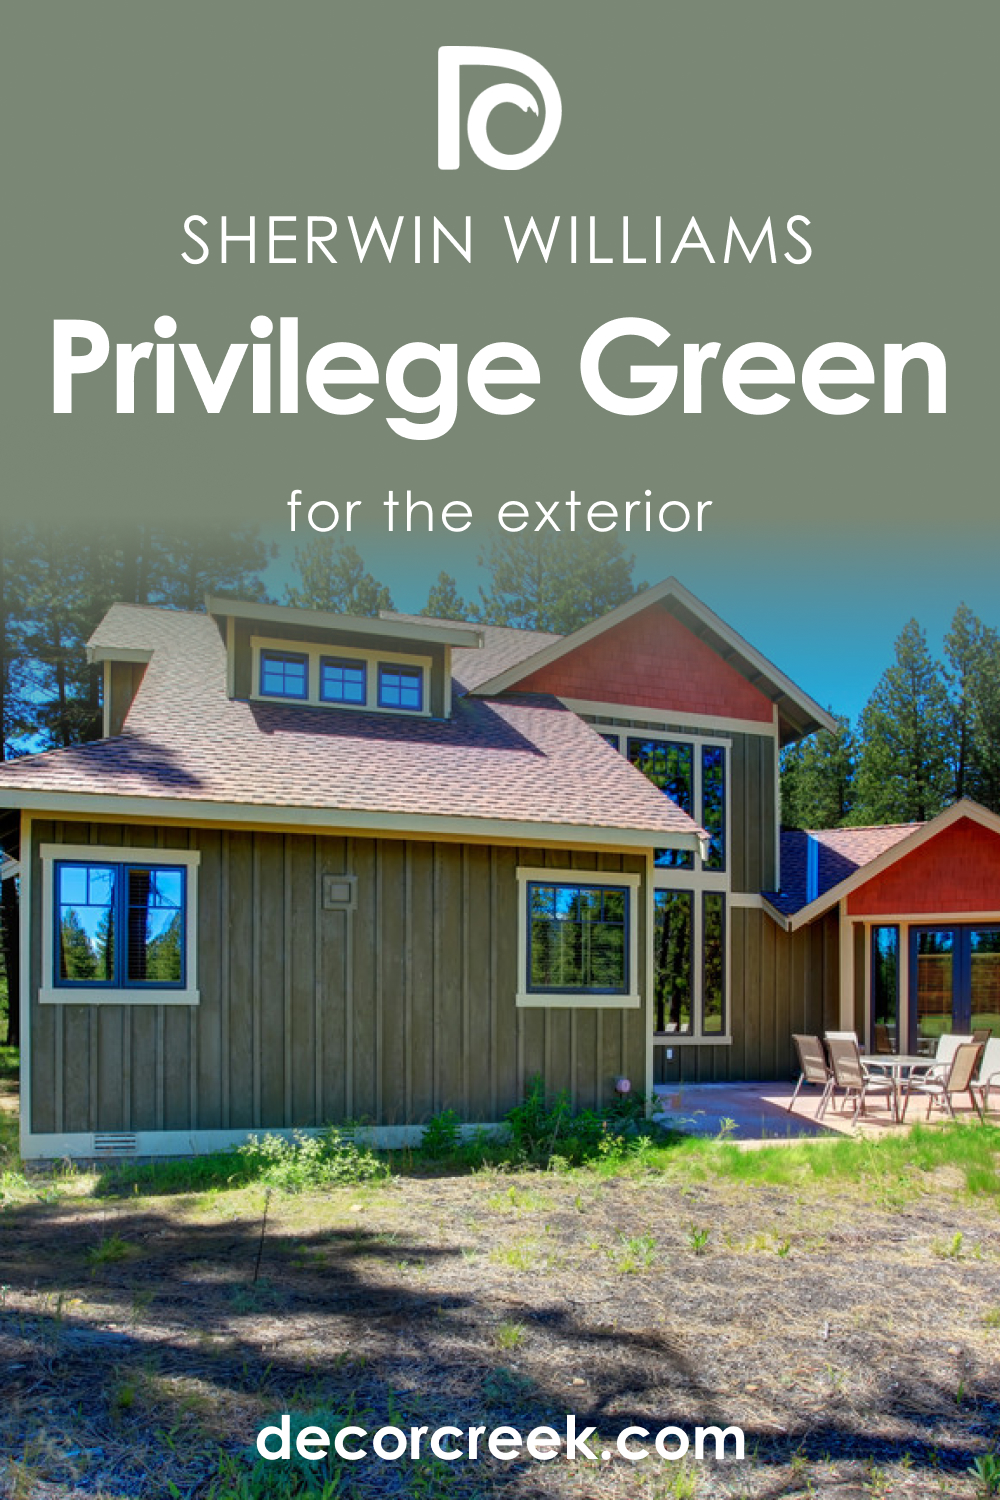 Privilege Green SW 6193 for Exterior Use